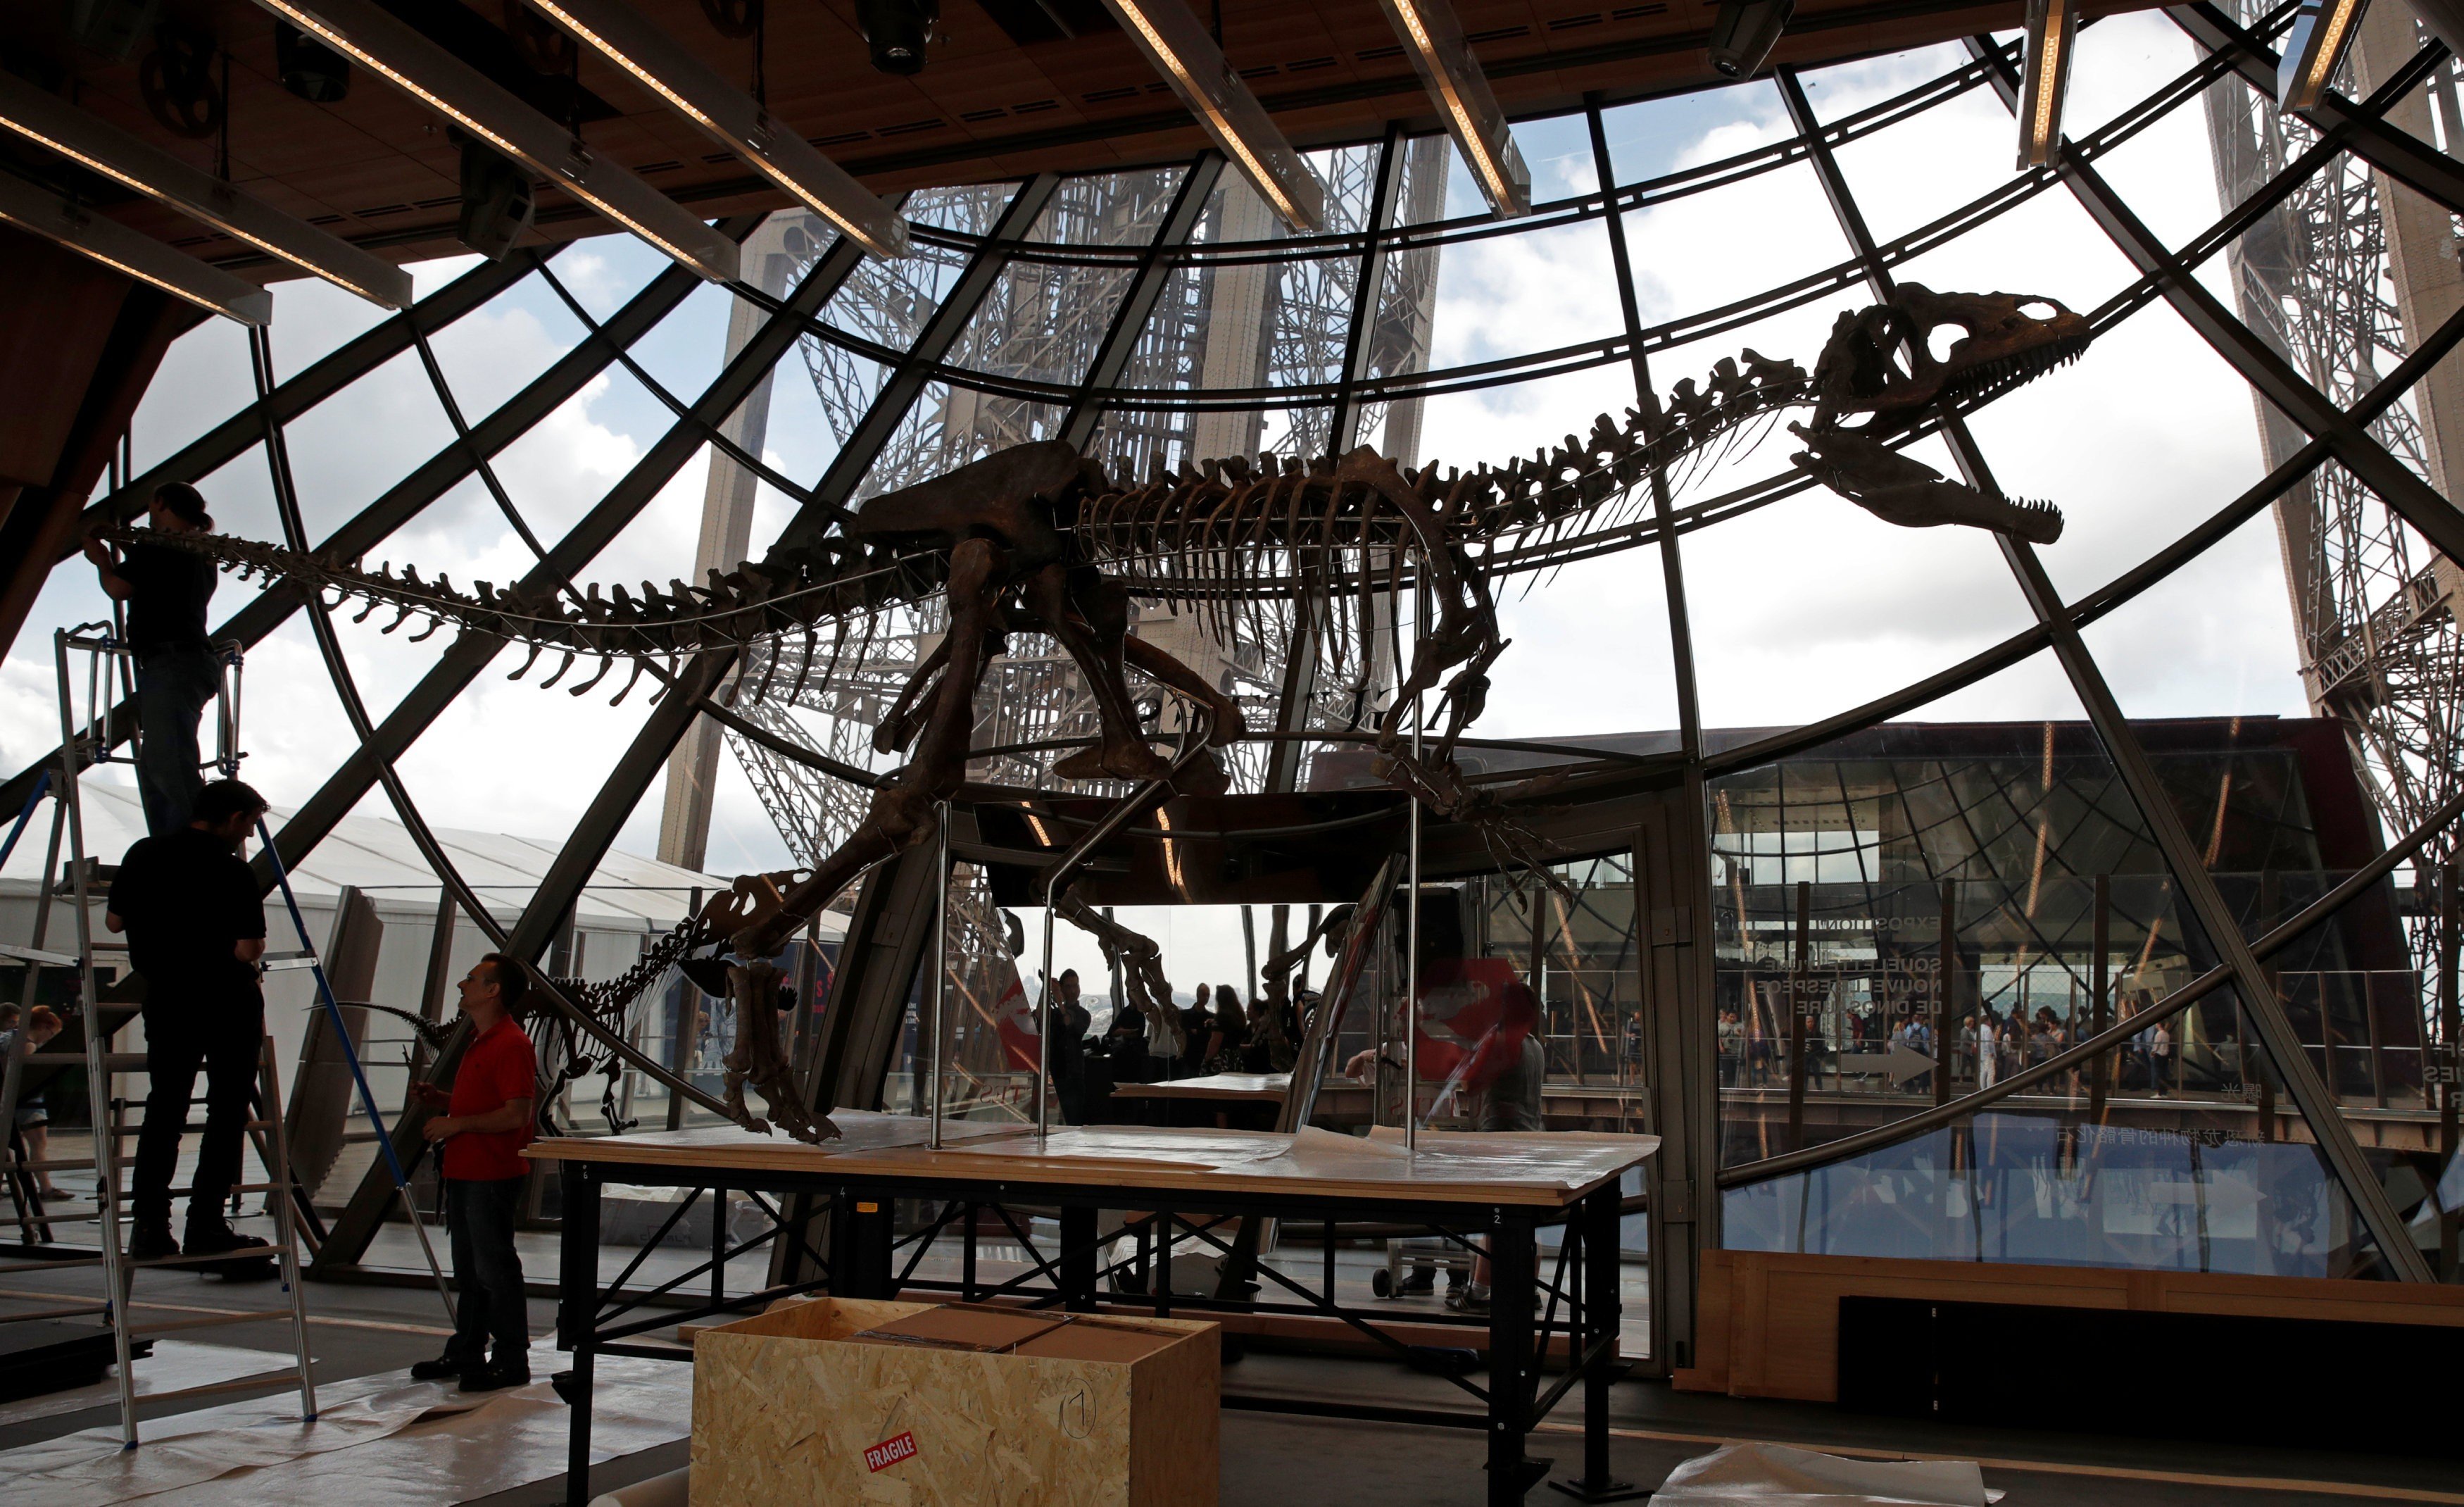 A 150-million-year-old dinosaur skeleton, which is 70 per cent intact, was bought at an auction at the Eiffel Tower in Paris on Monday. Photo: Reuters